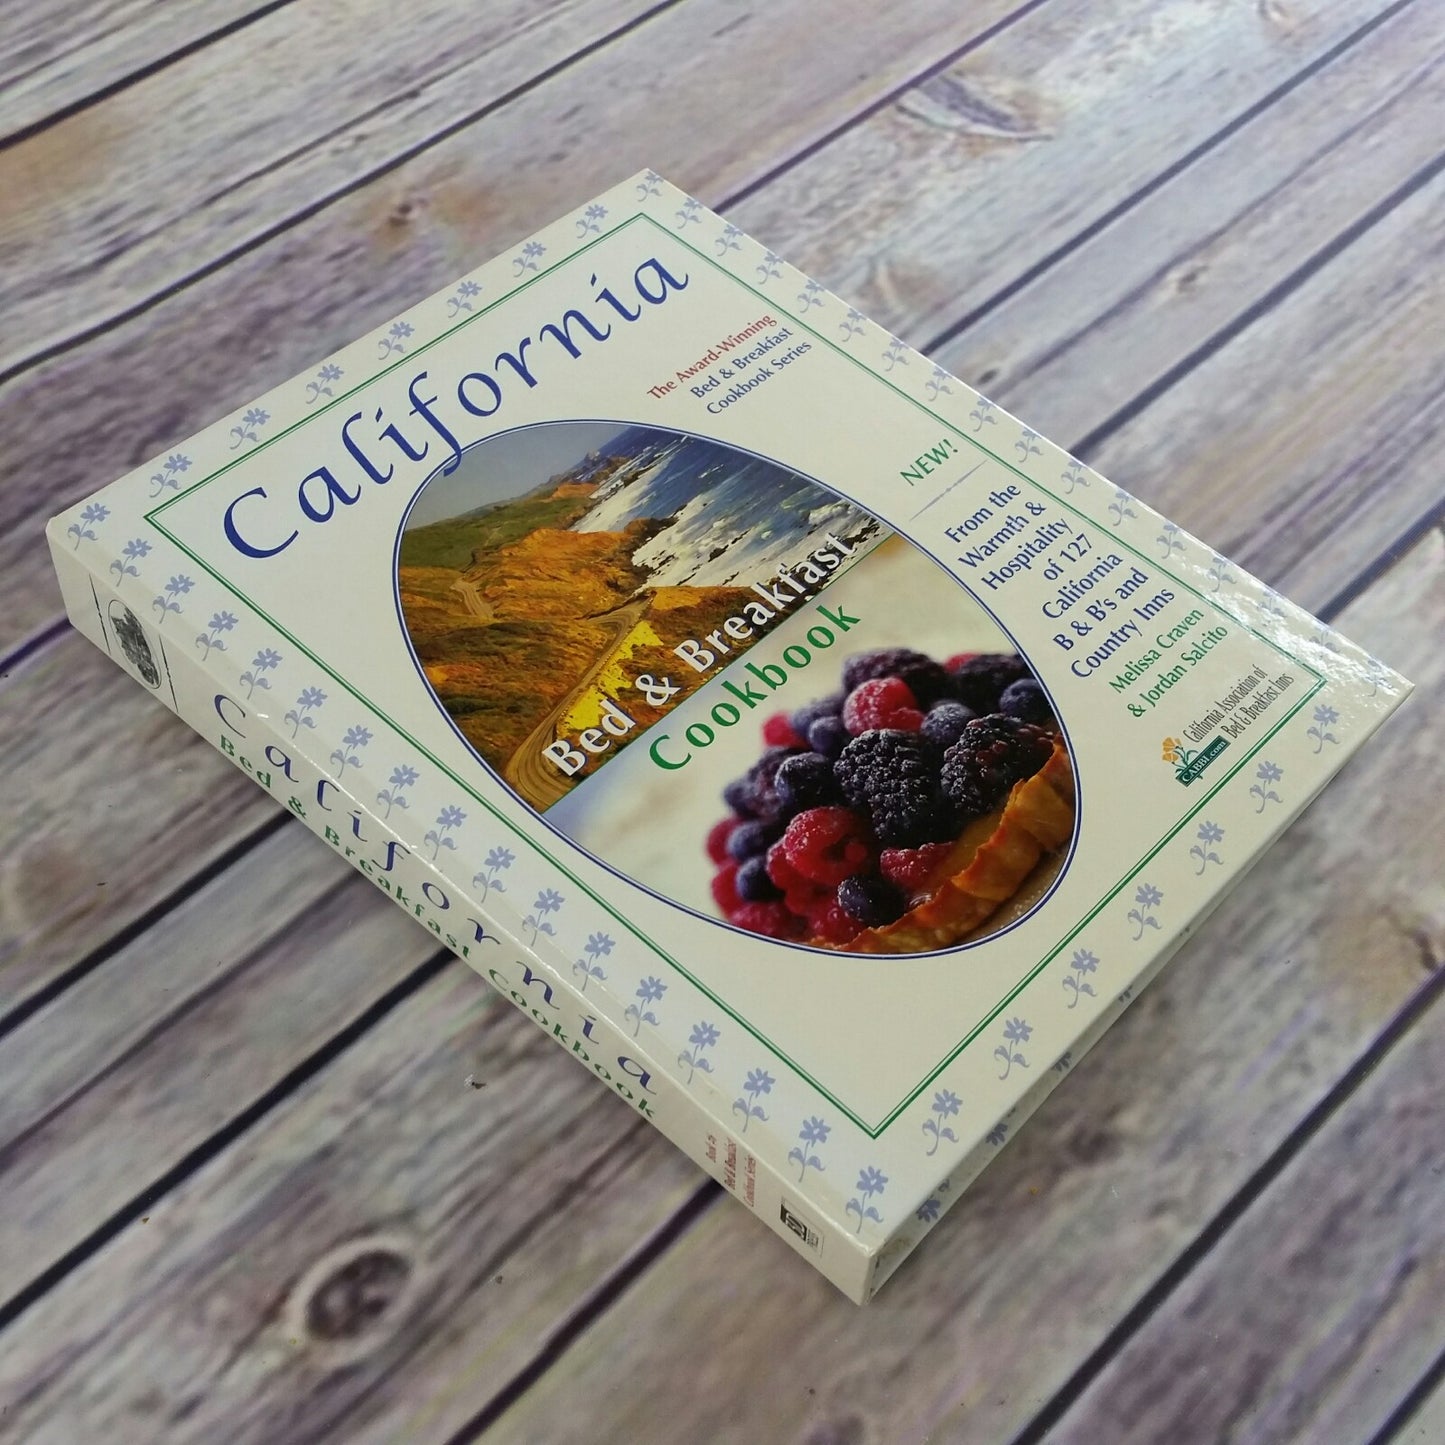 California Cookbook Bed and Breakfast Recipes 2004 Craven Salcito Hardcover Spiral Bound